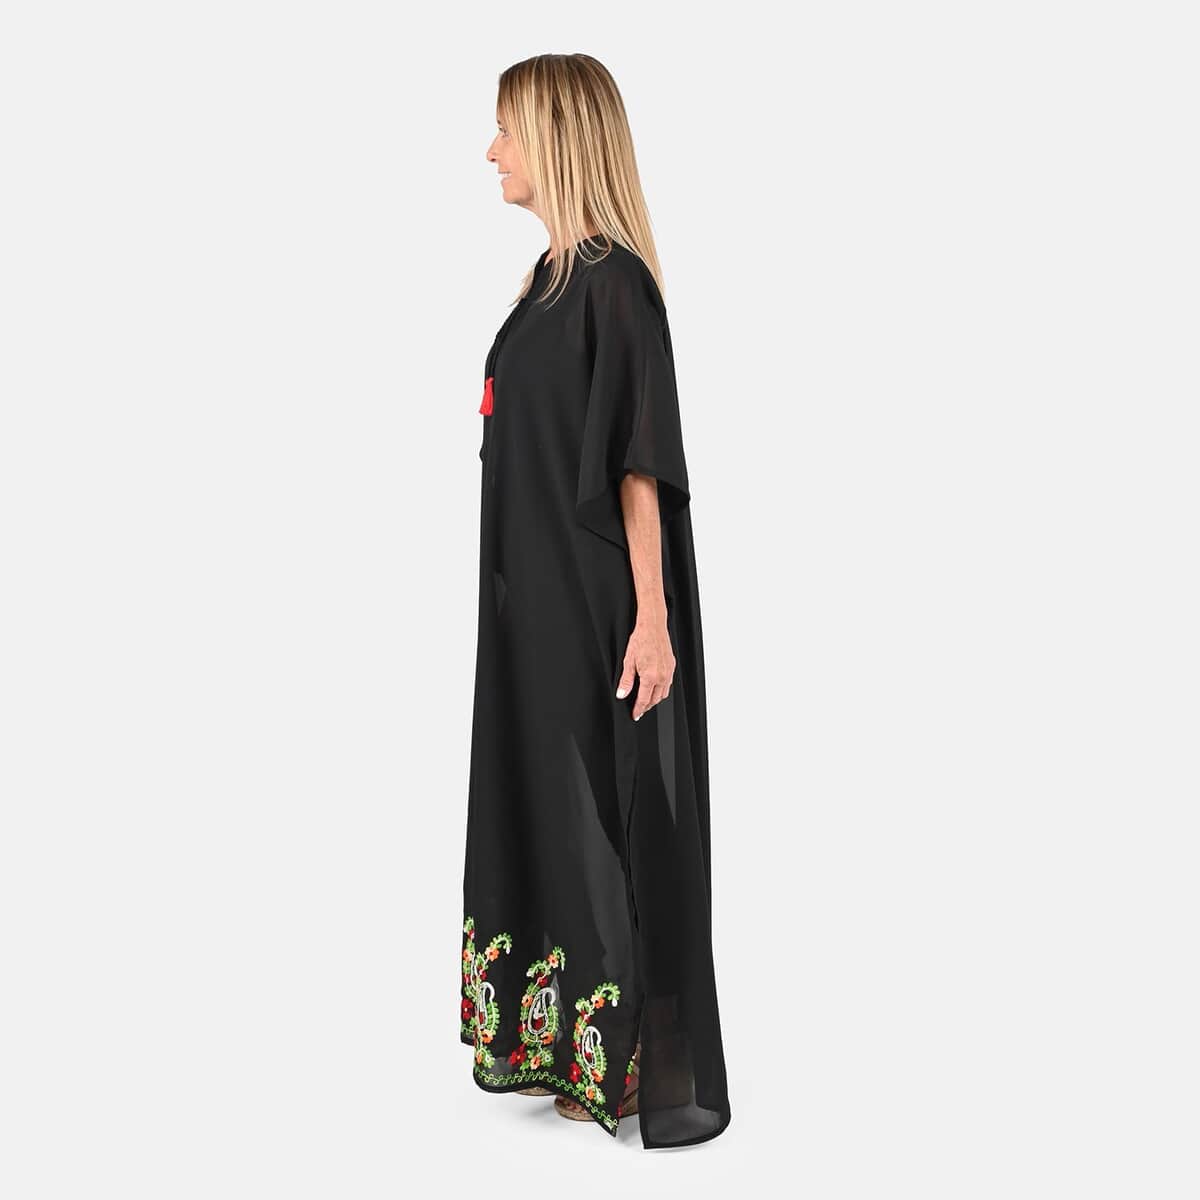 Tamsy Black Notch Neck Long Maxi Kaftan with Tassels - One Size Fits Most image number 2